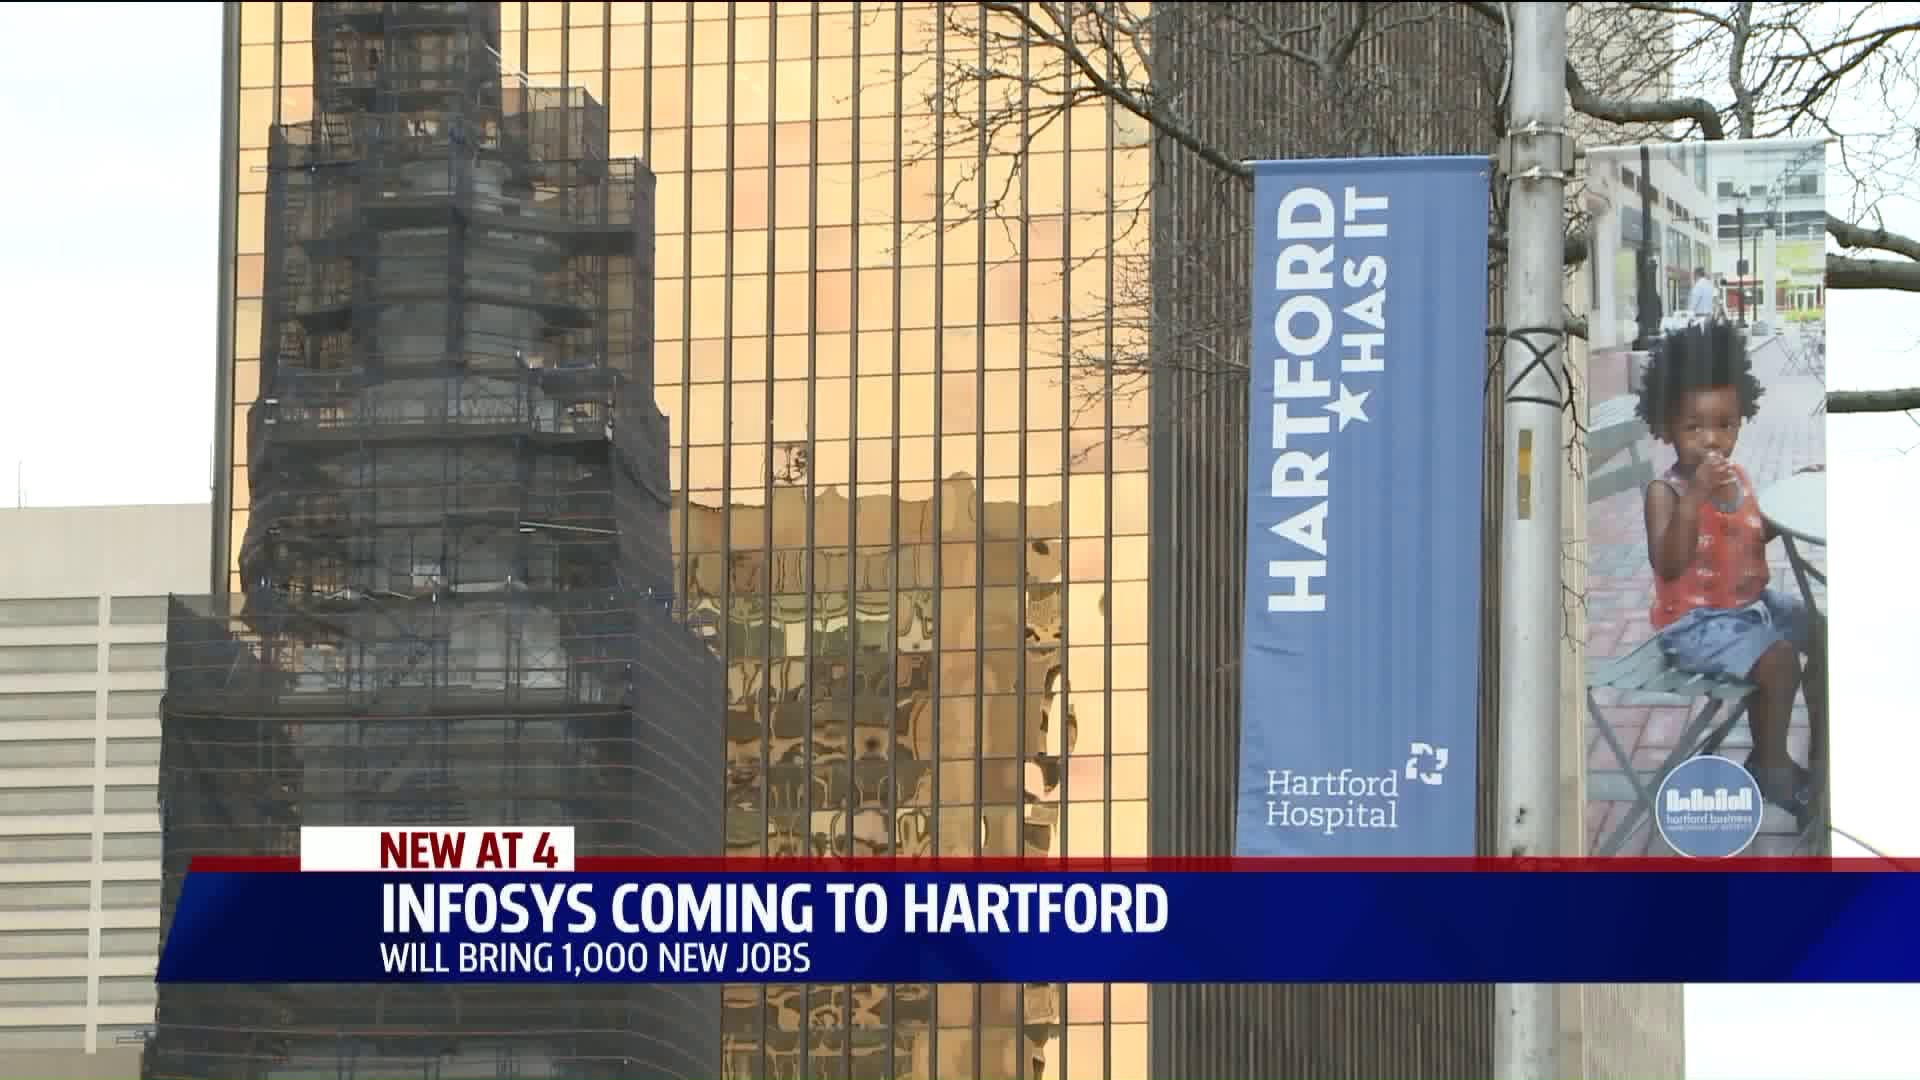 Infosys coming to Hartford